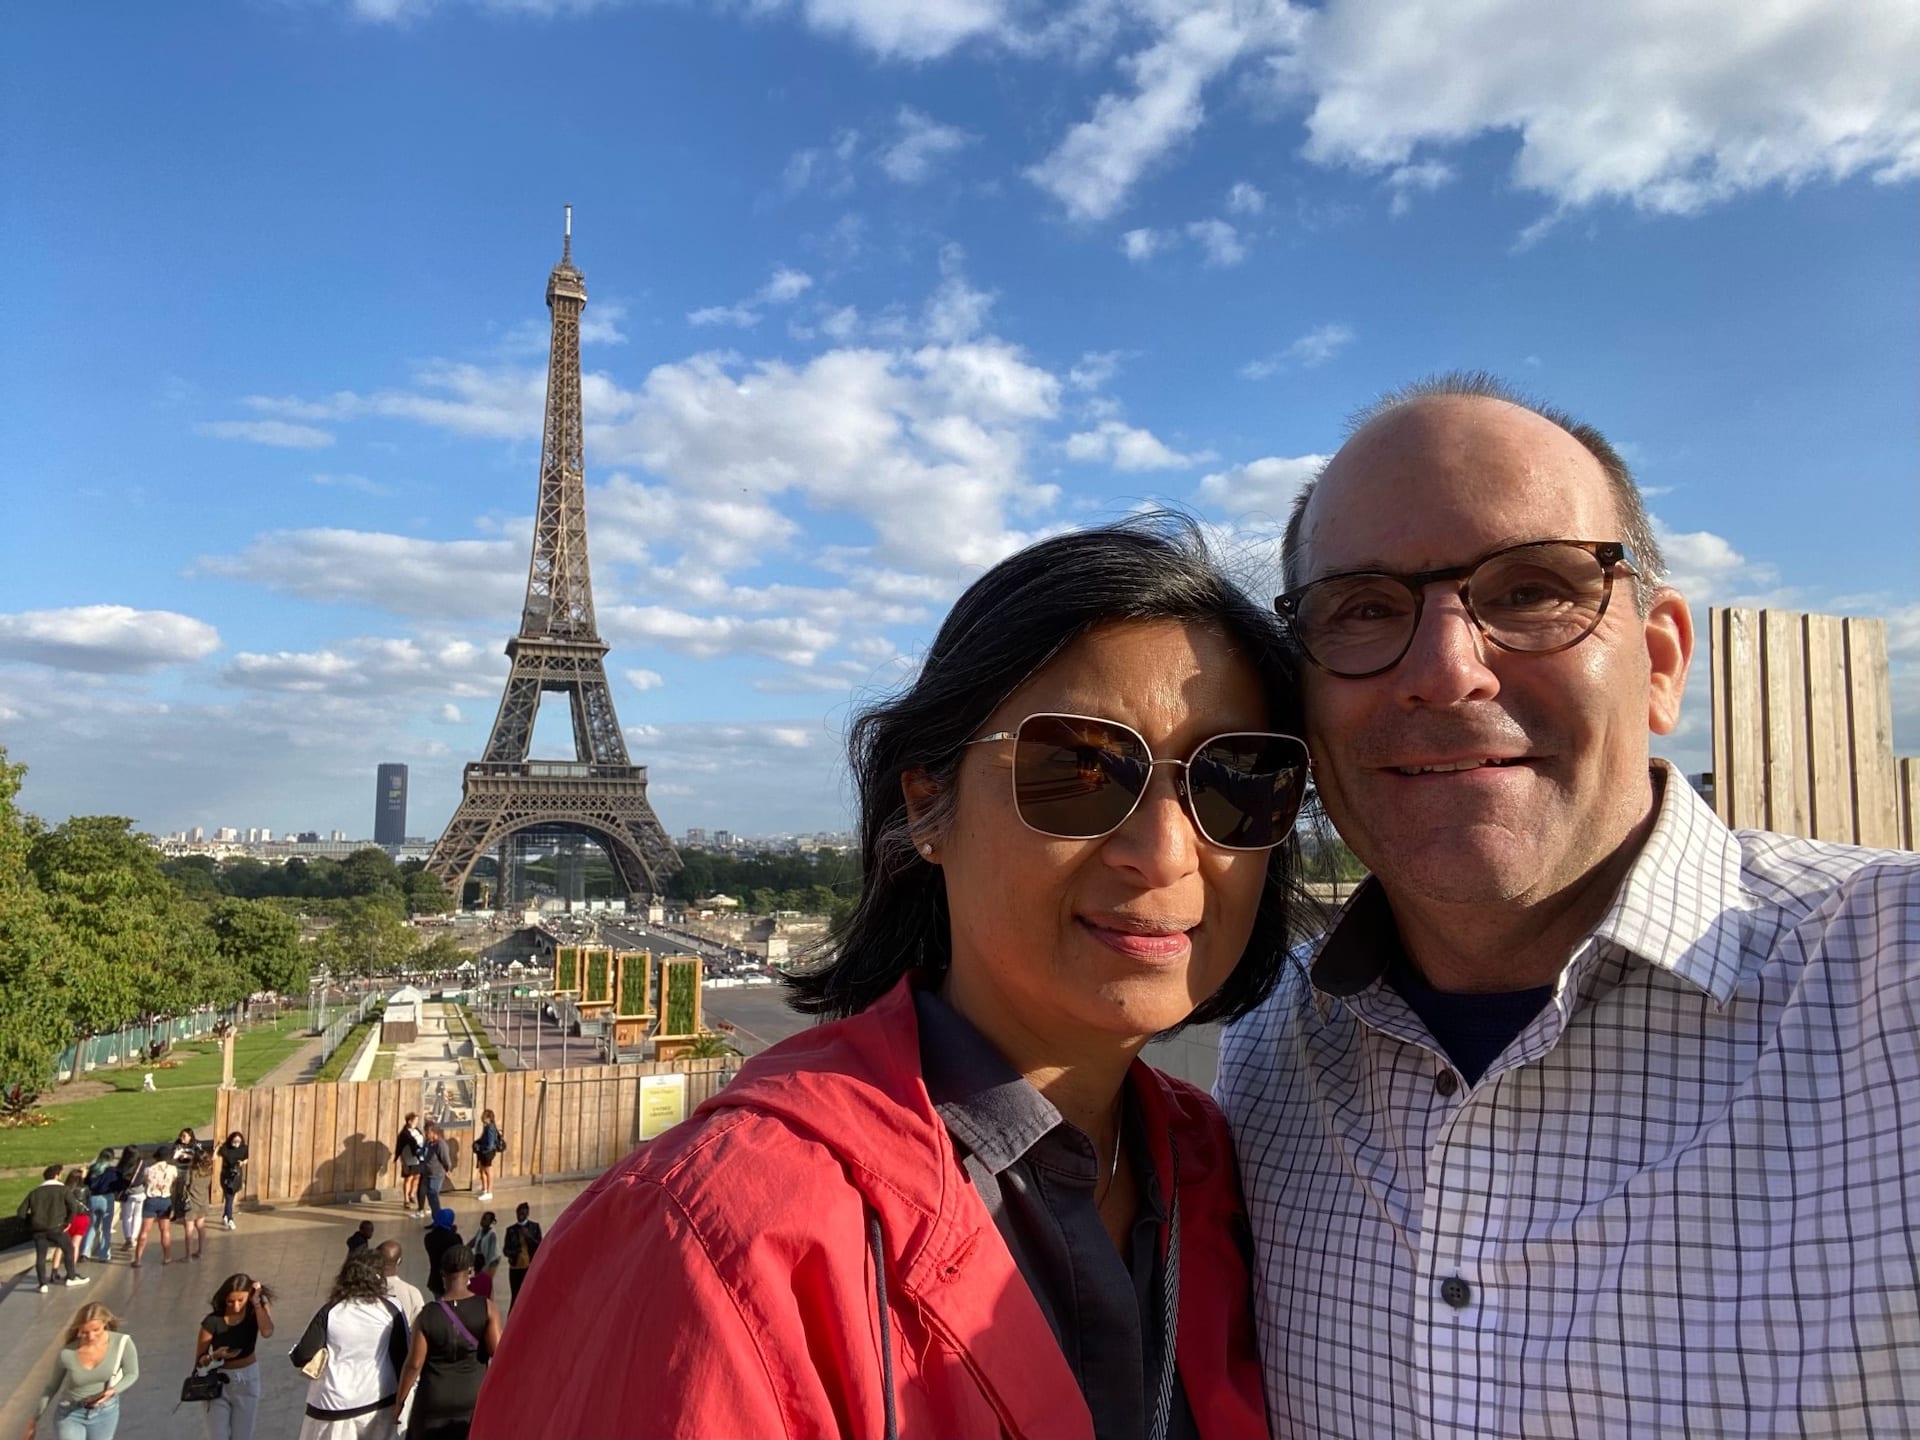 Couple poses in front of the Eiffel Tower with a blue sky above